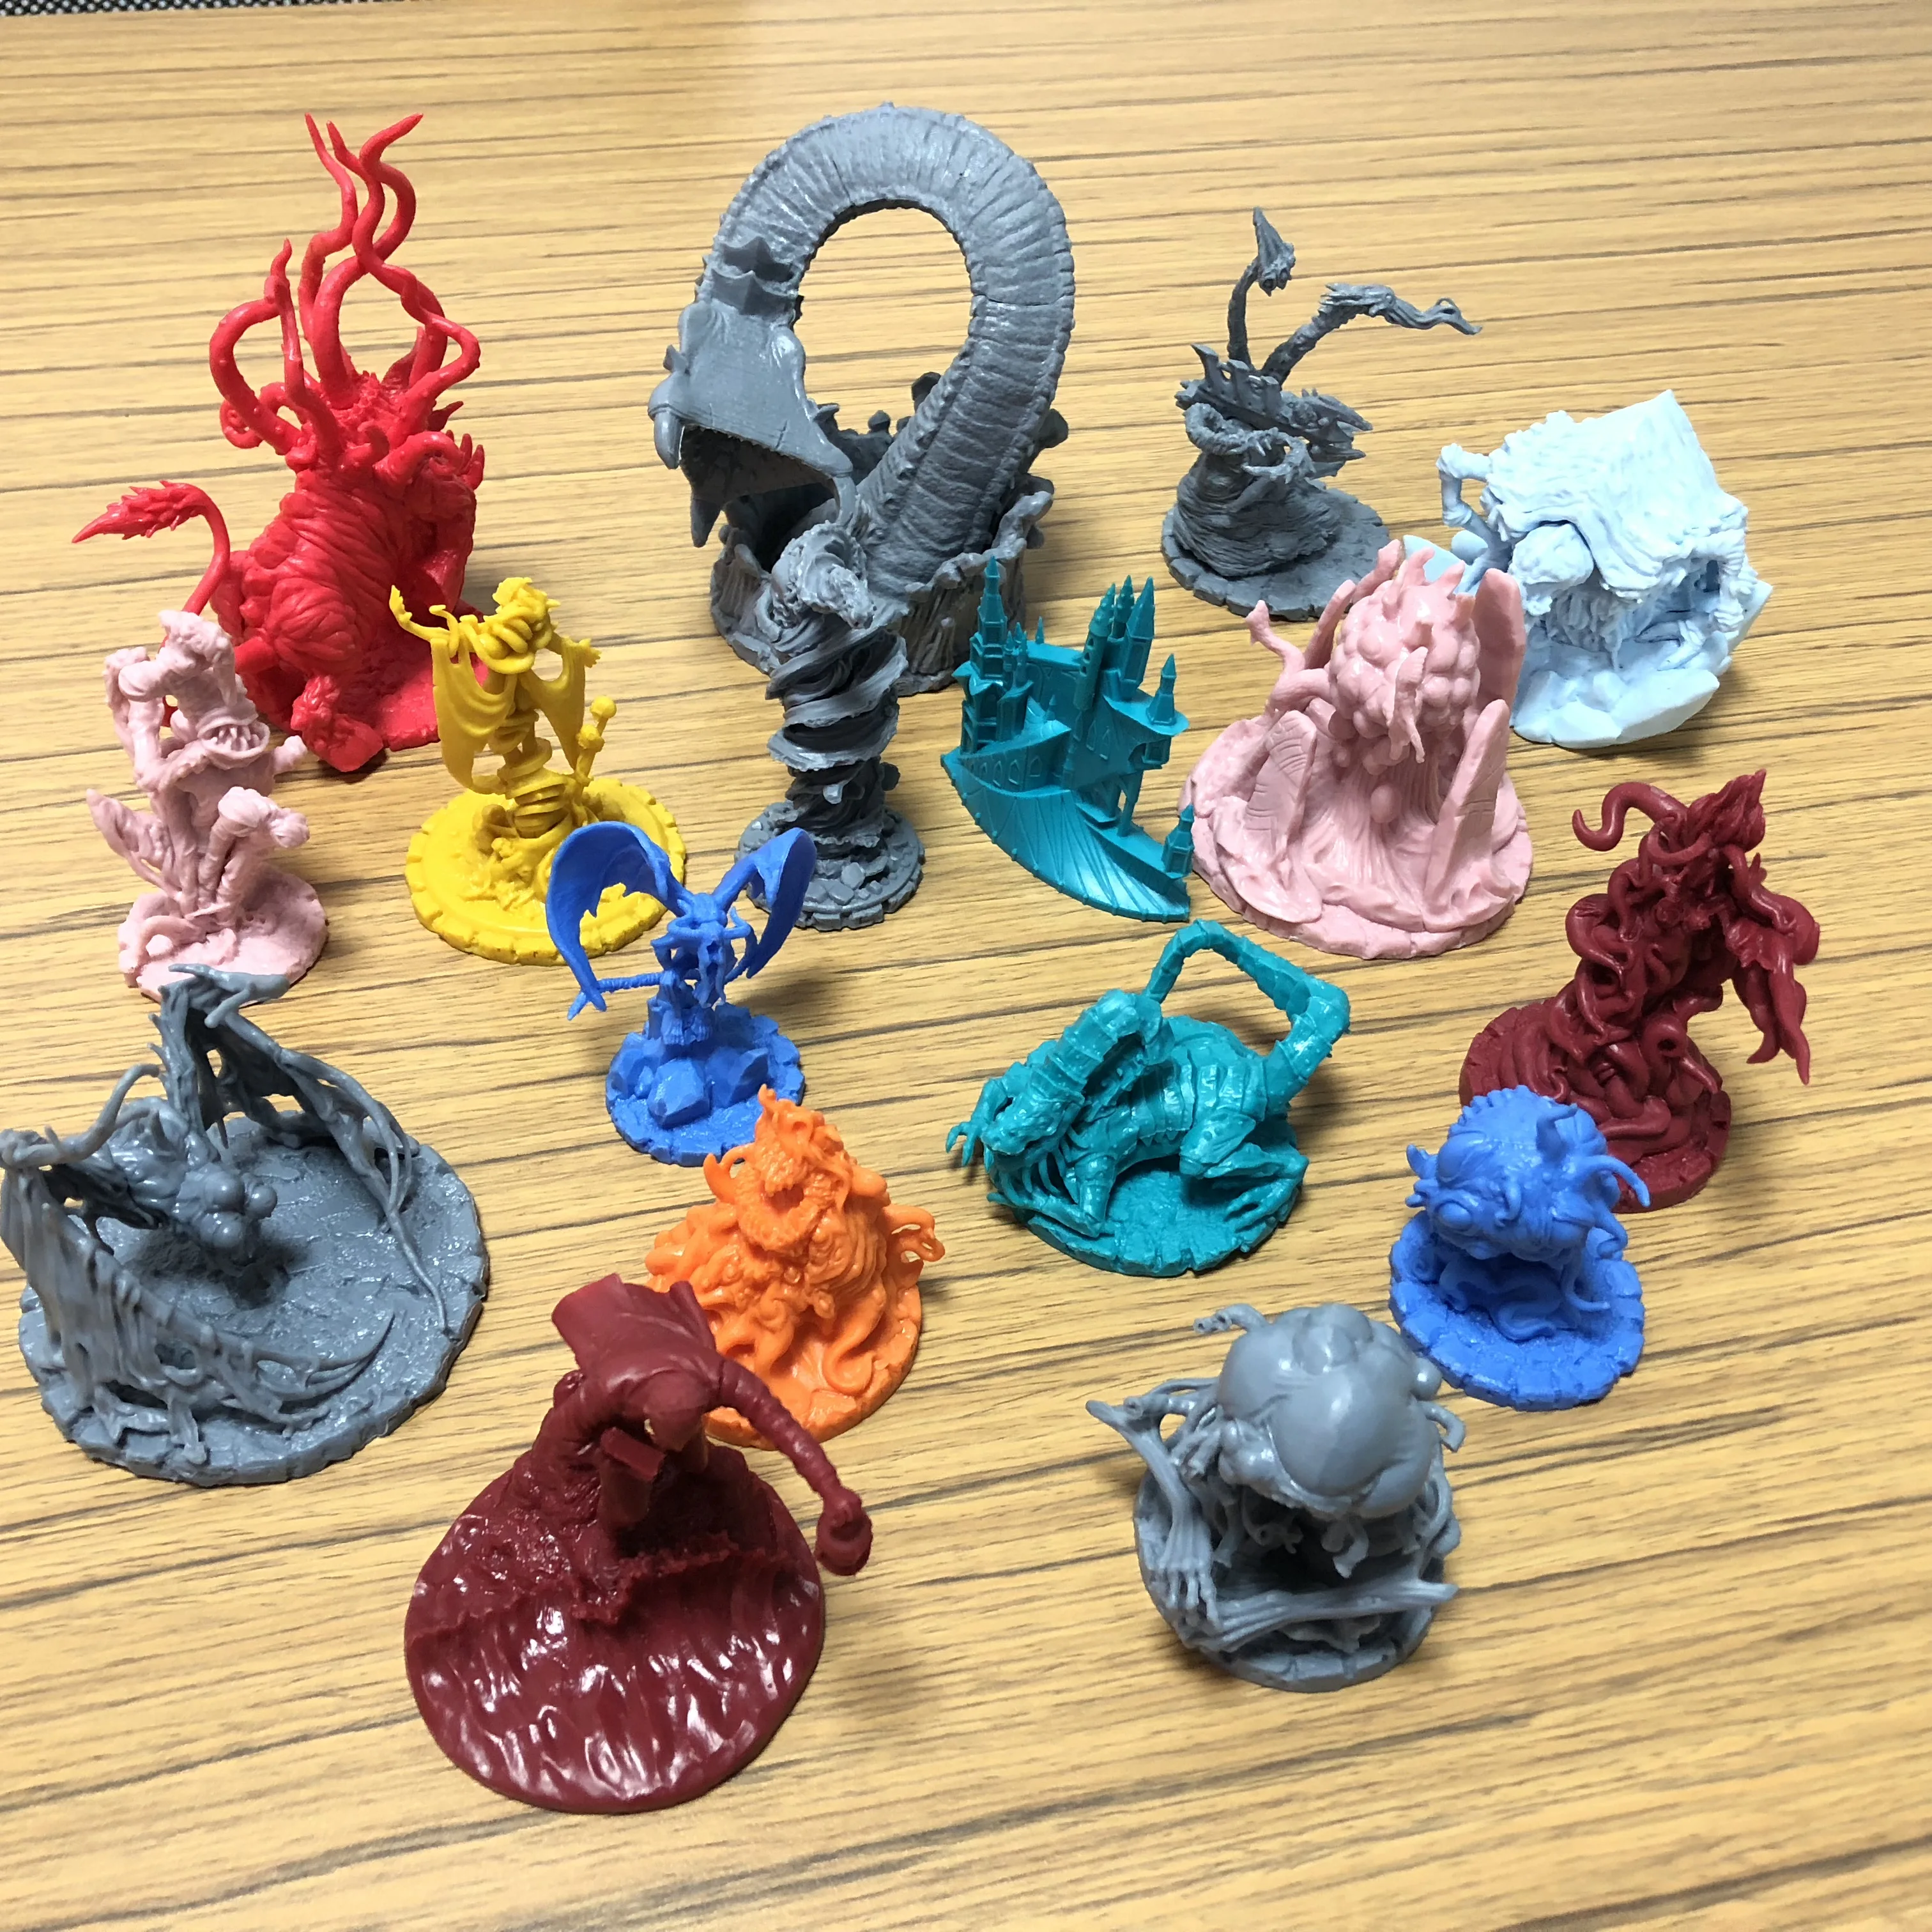 D&D Dungeons & Dragon Board Game Miniatures Vintage Cthulhu Wars Figures Gifts 